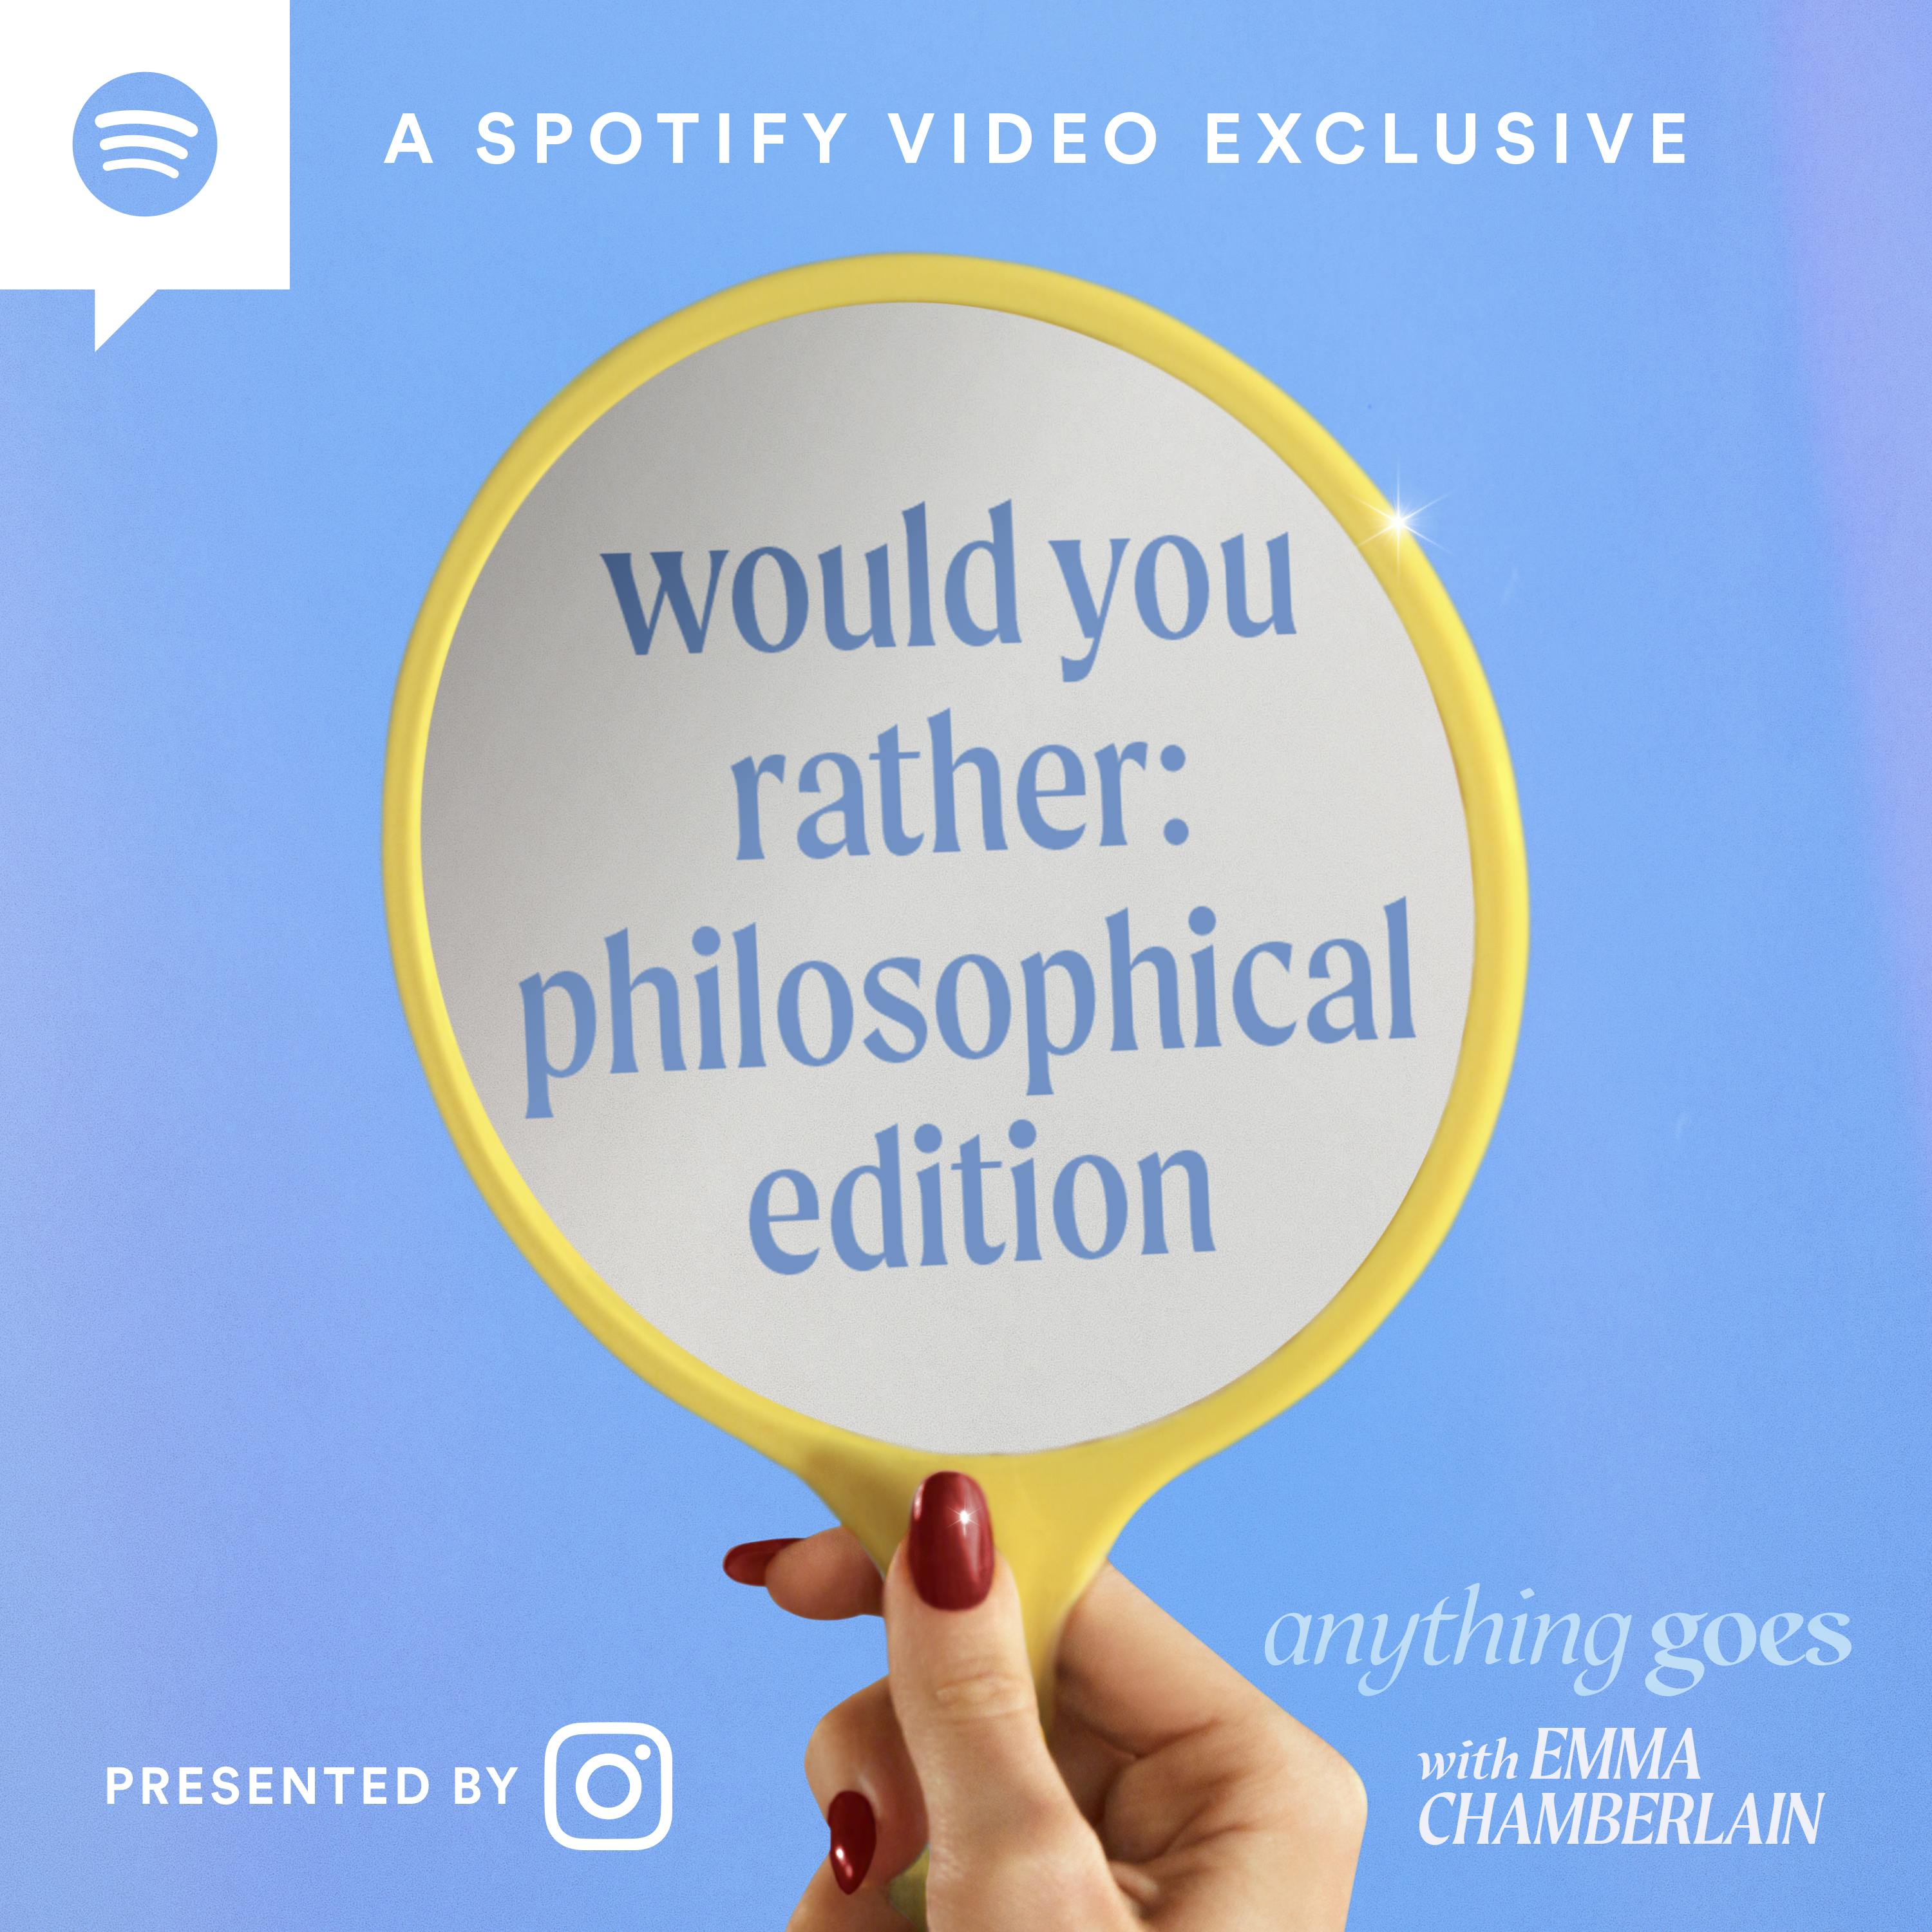 would you rather: philosophical edition [video]